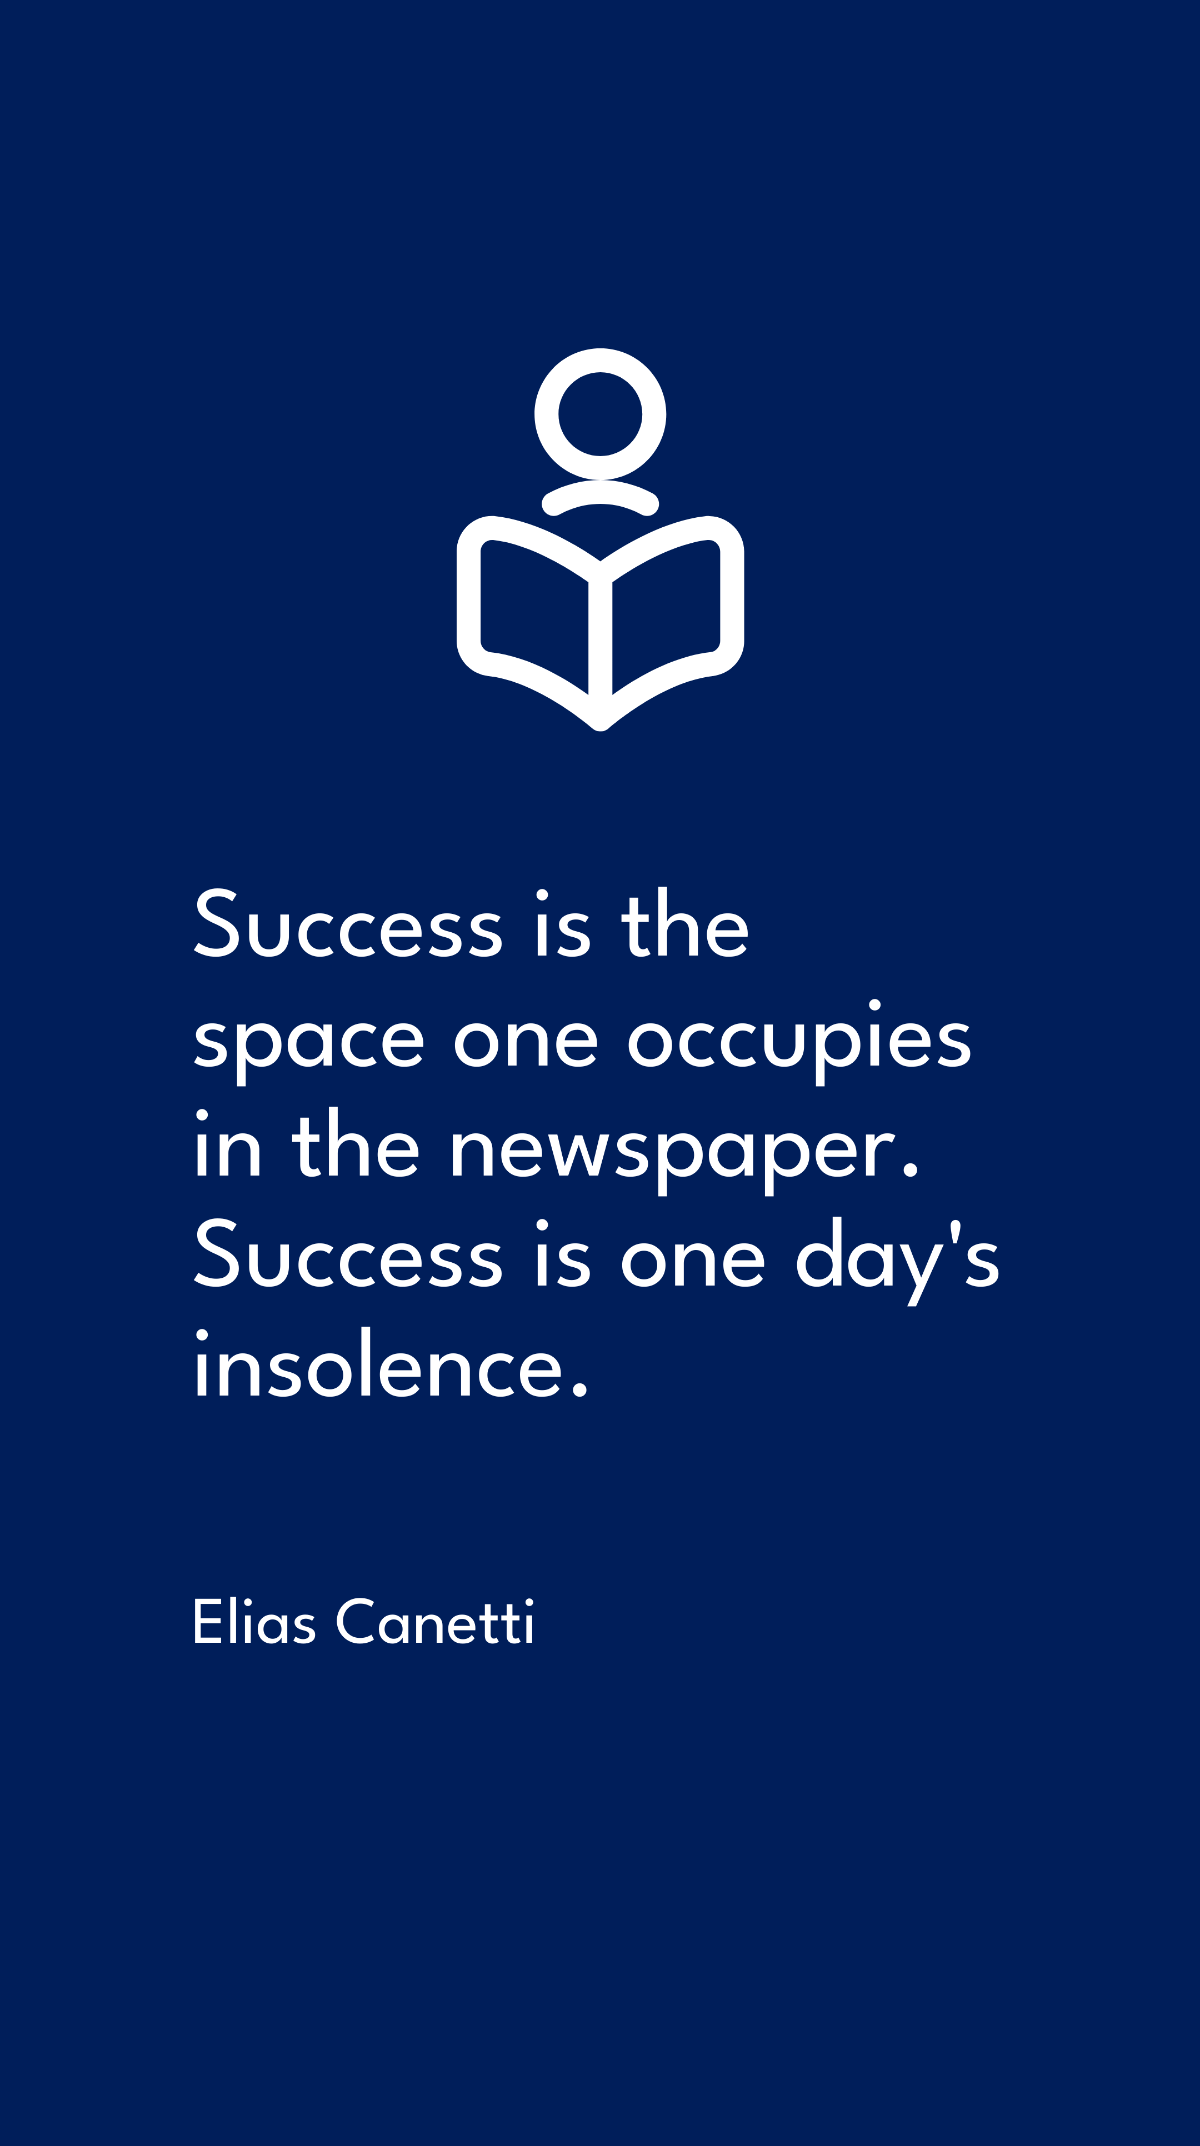 Free Elias Canetti - Success is the space one occupies in the newspaper. Success is one day's insolence. Template